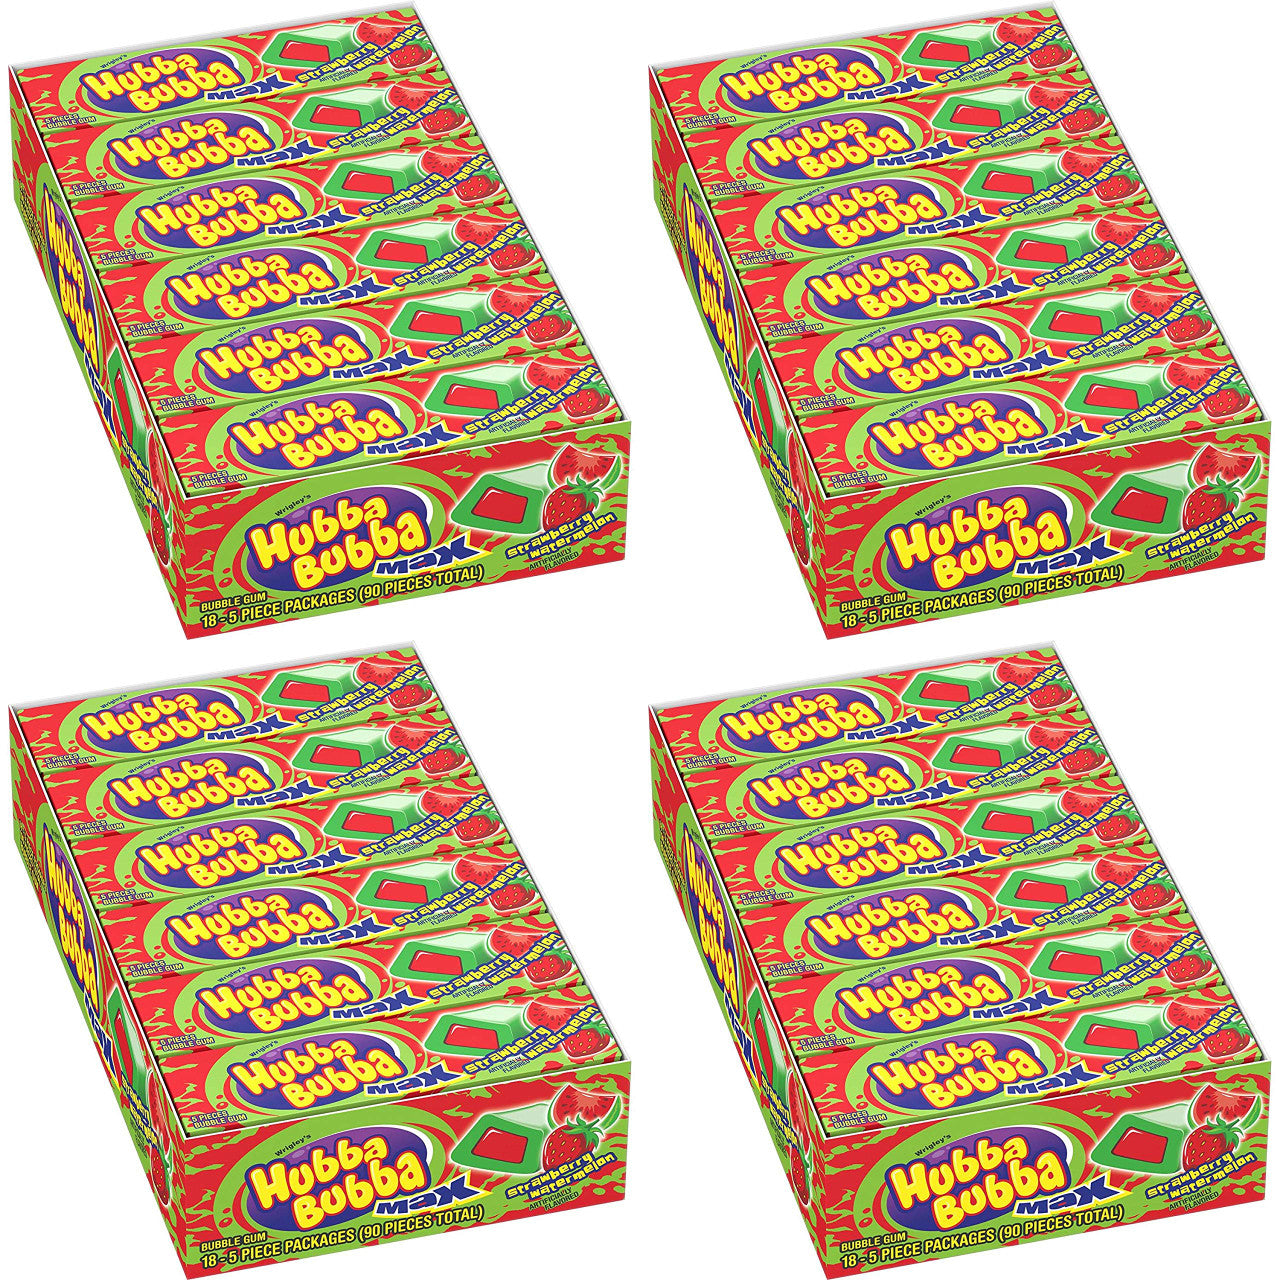 Hubba Bubba Max Strawberry Watermelon Bubble Gum, 5 Piece (Pack of 18) Pack of 4